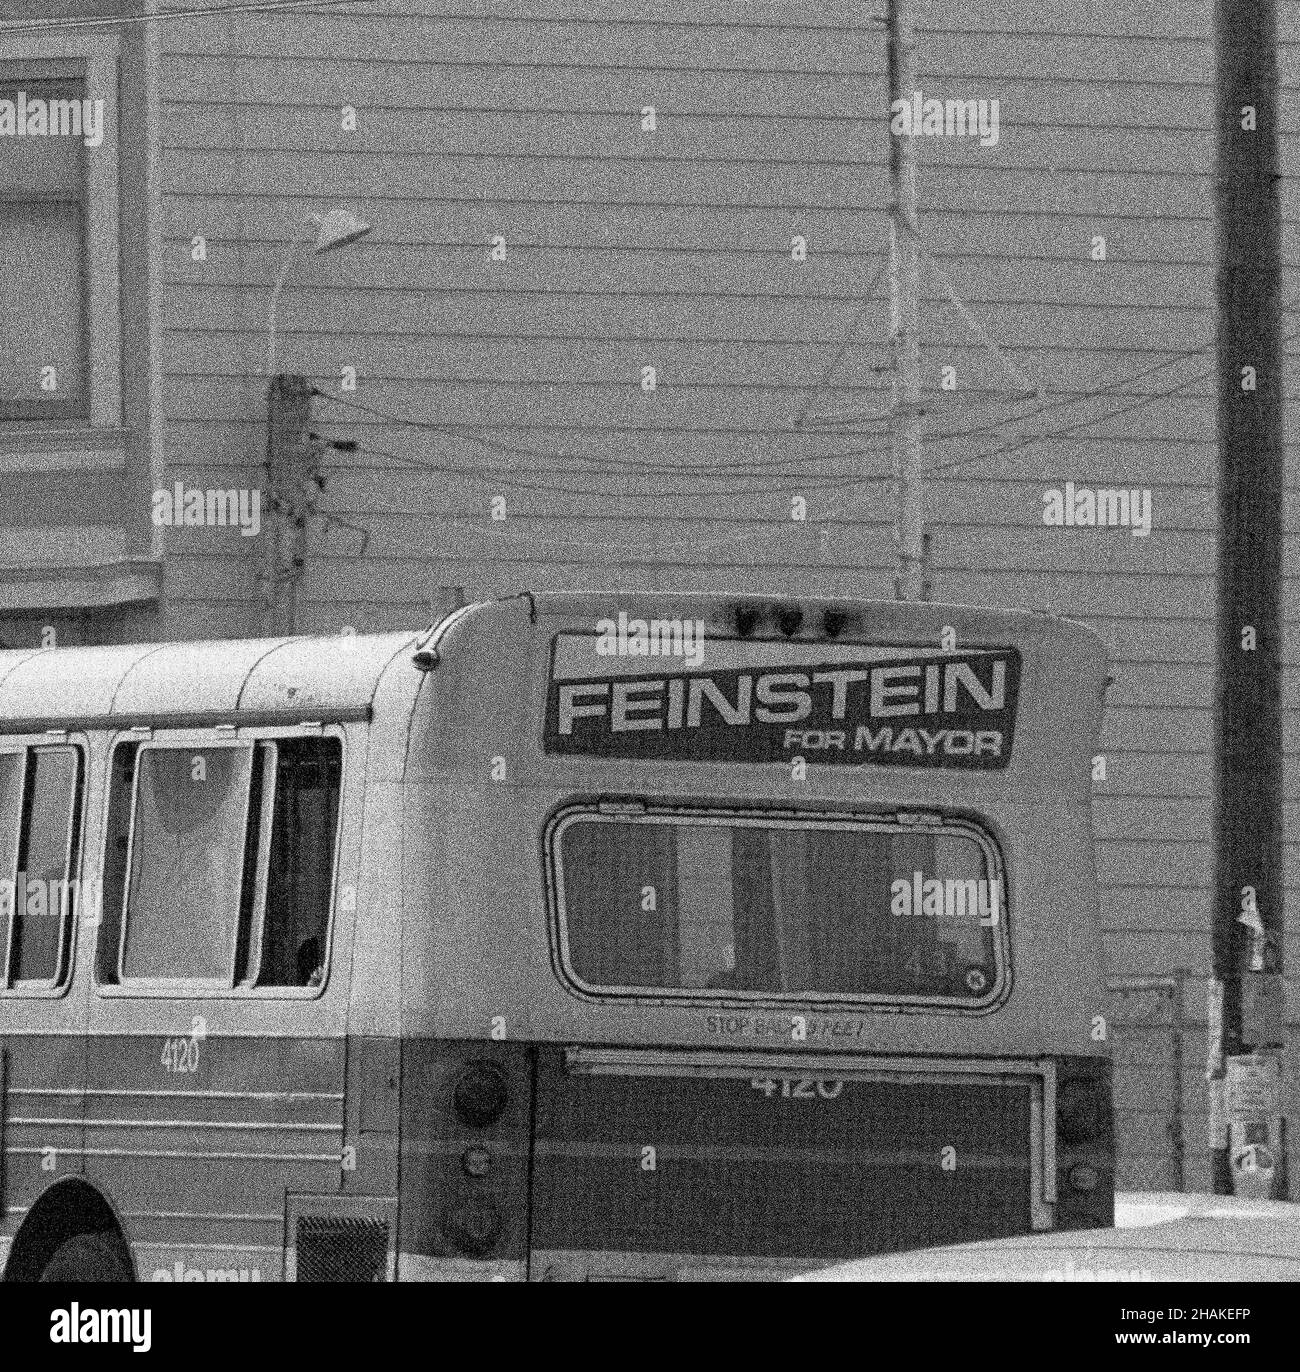 Dianne Feinstein for San Francisco Mayor campaign posters on a MUNI bus in San Francisco, California, 1970s Stock Photo